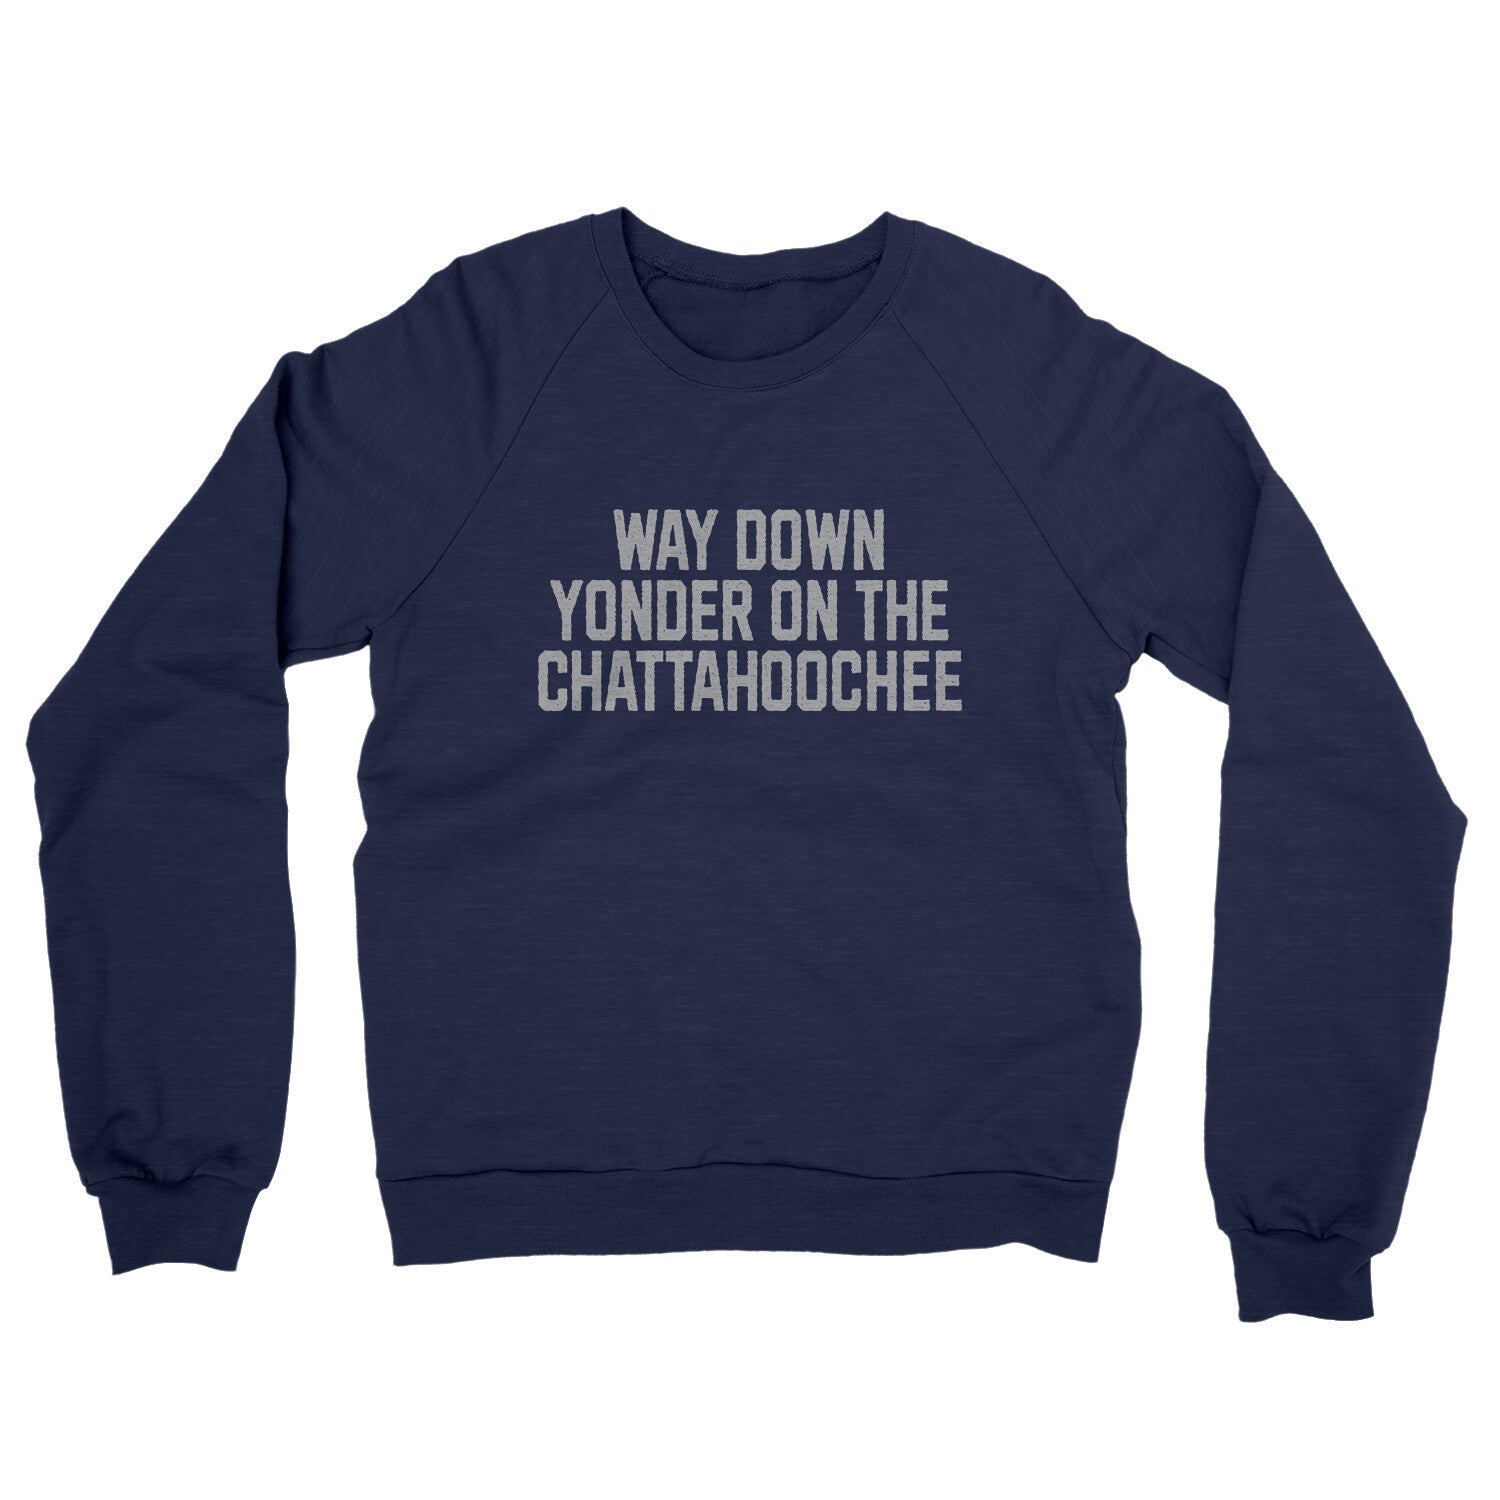 Way Down Yonder on the Chattahoochee in Navy Color